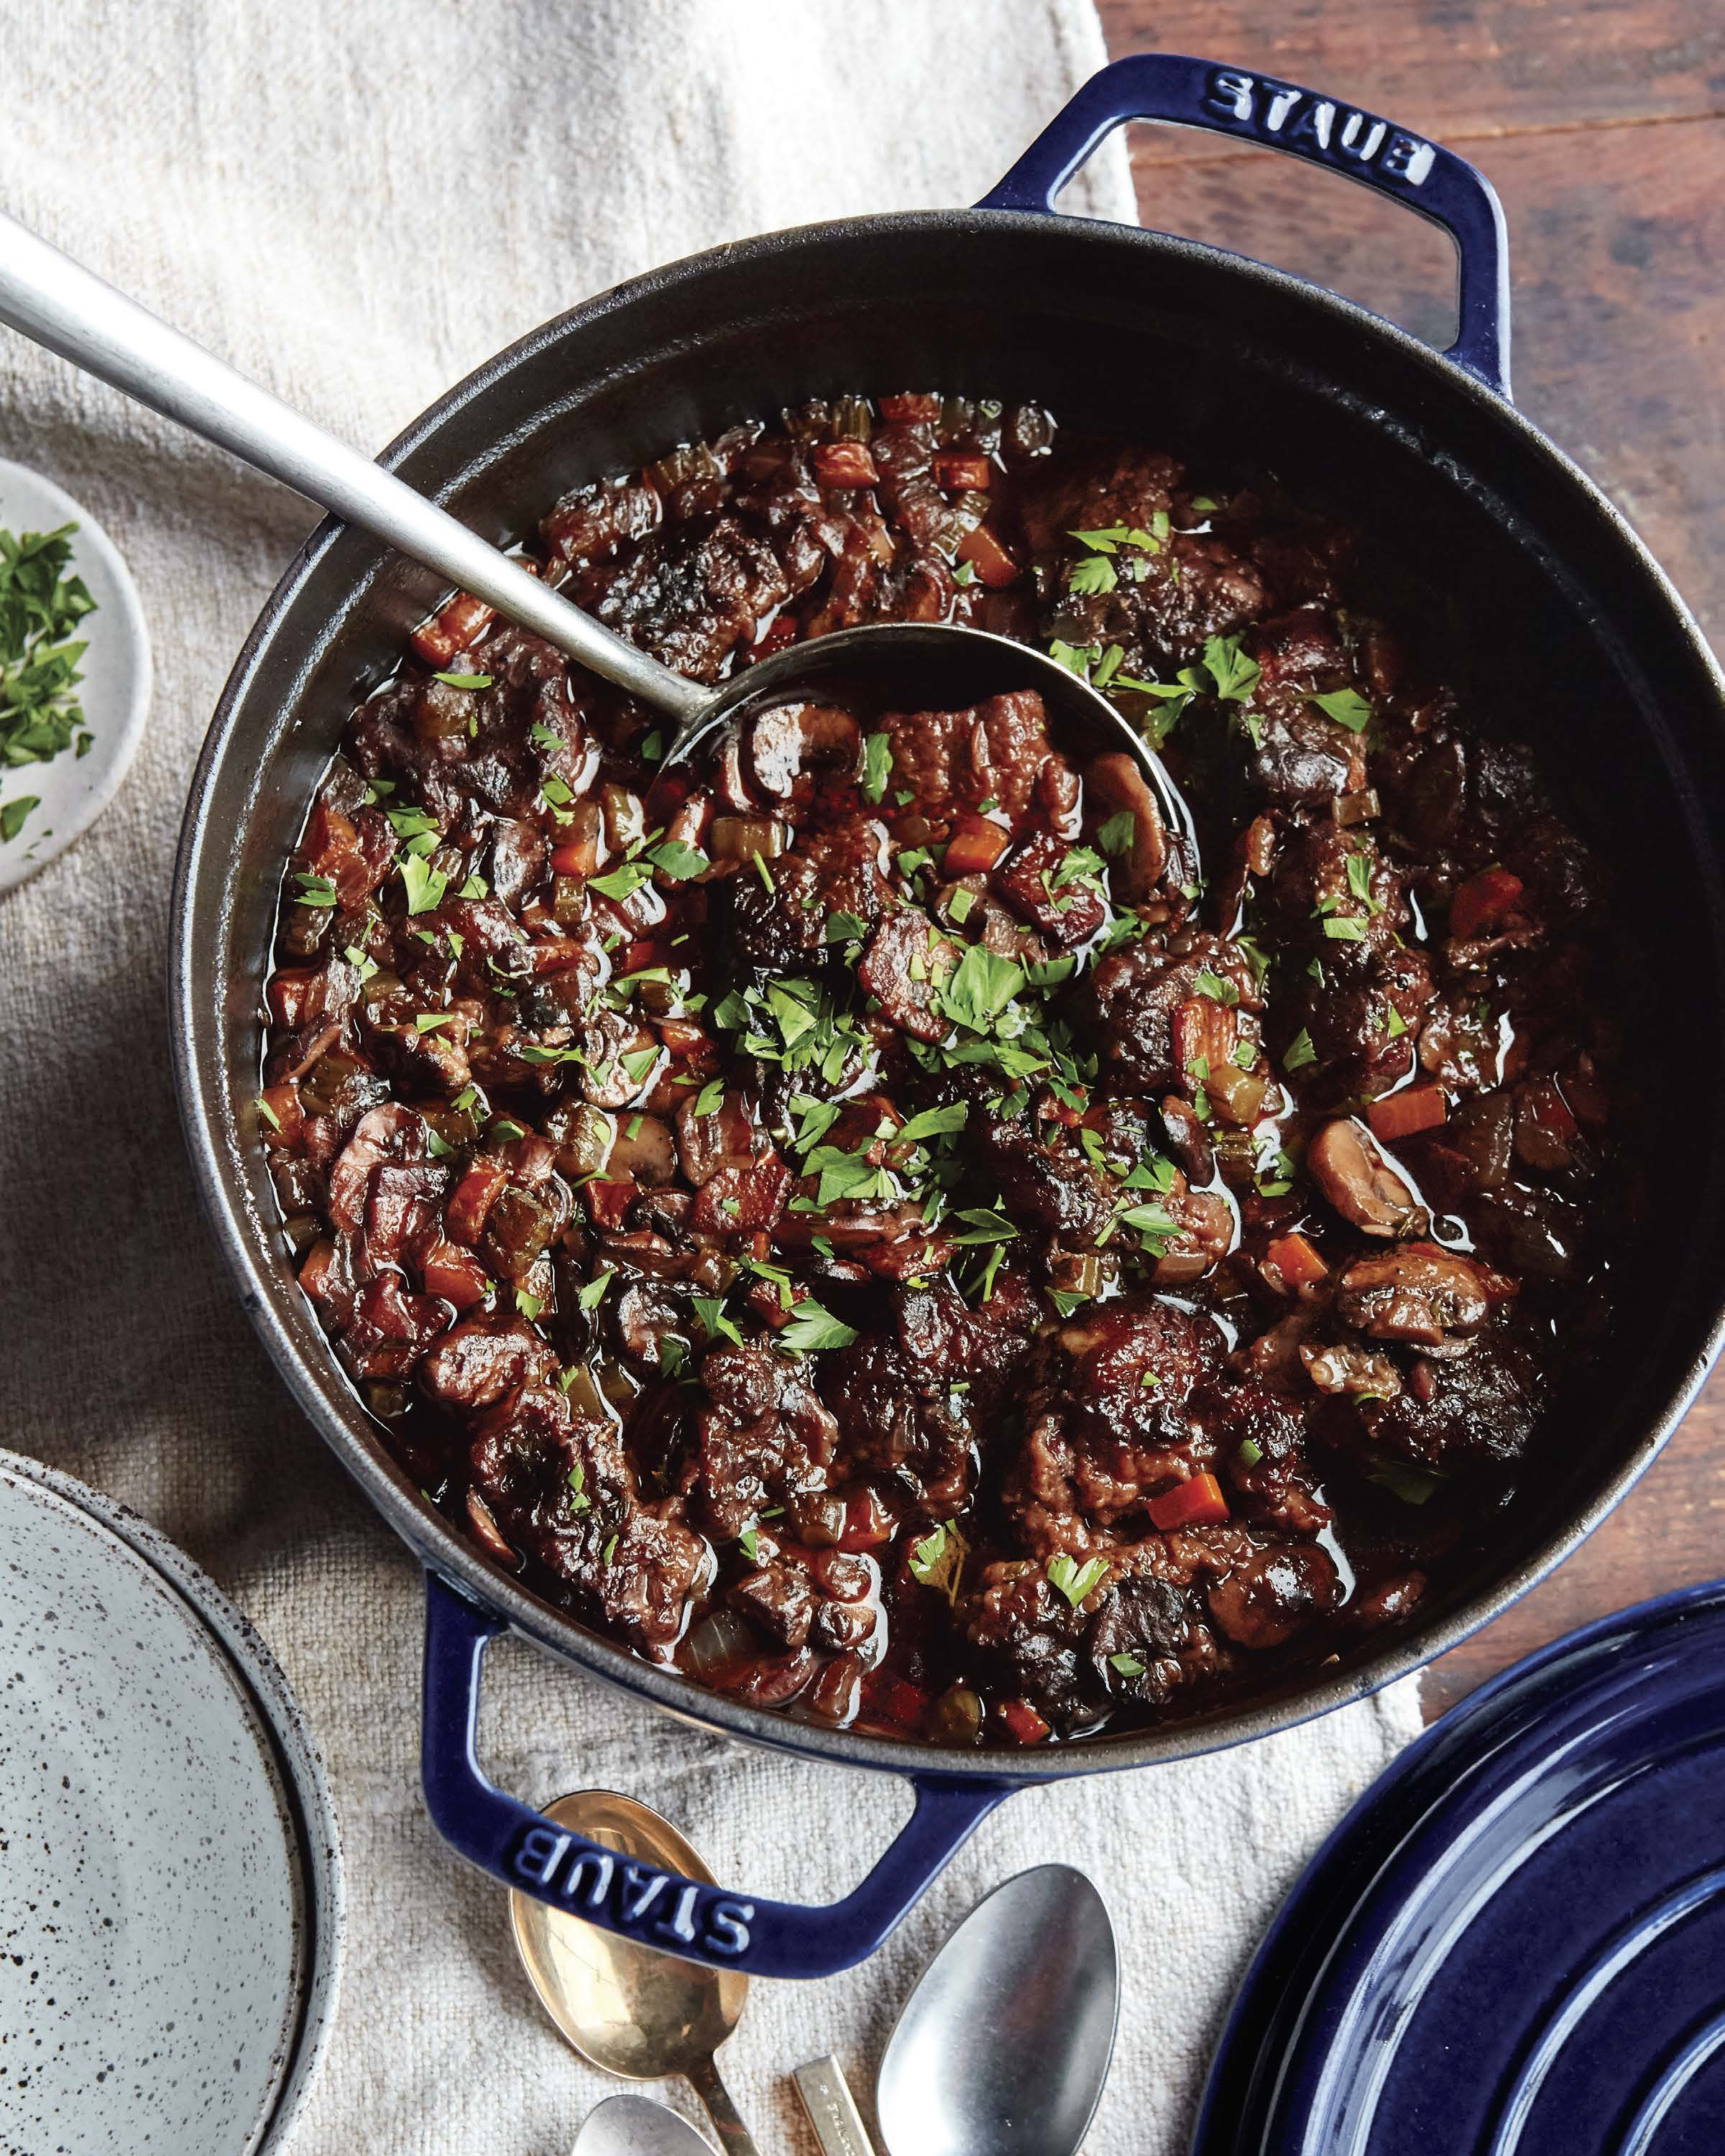 Here are 5 Mouthwatering Recipes to Try from Staub's New Cookbook -  Williams-Sonoma Taste